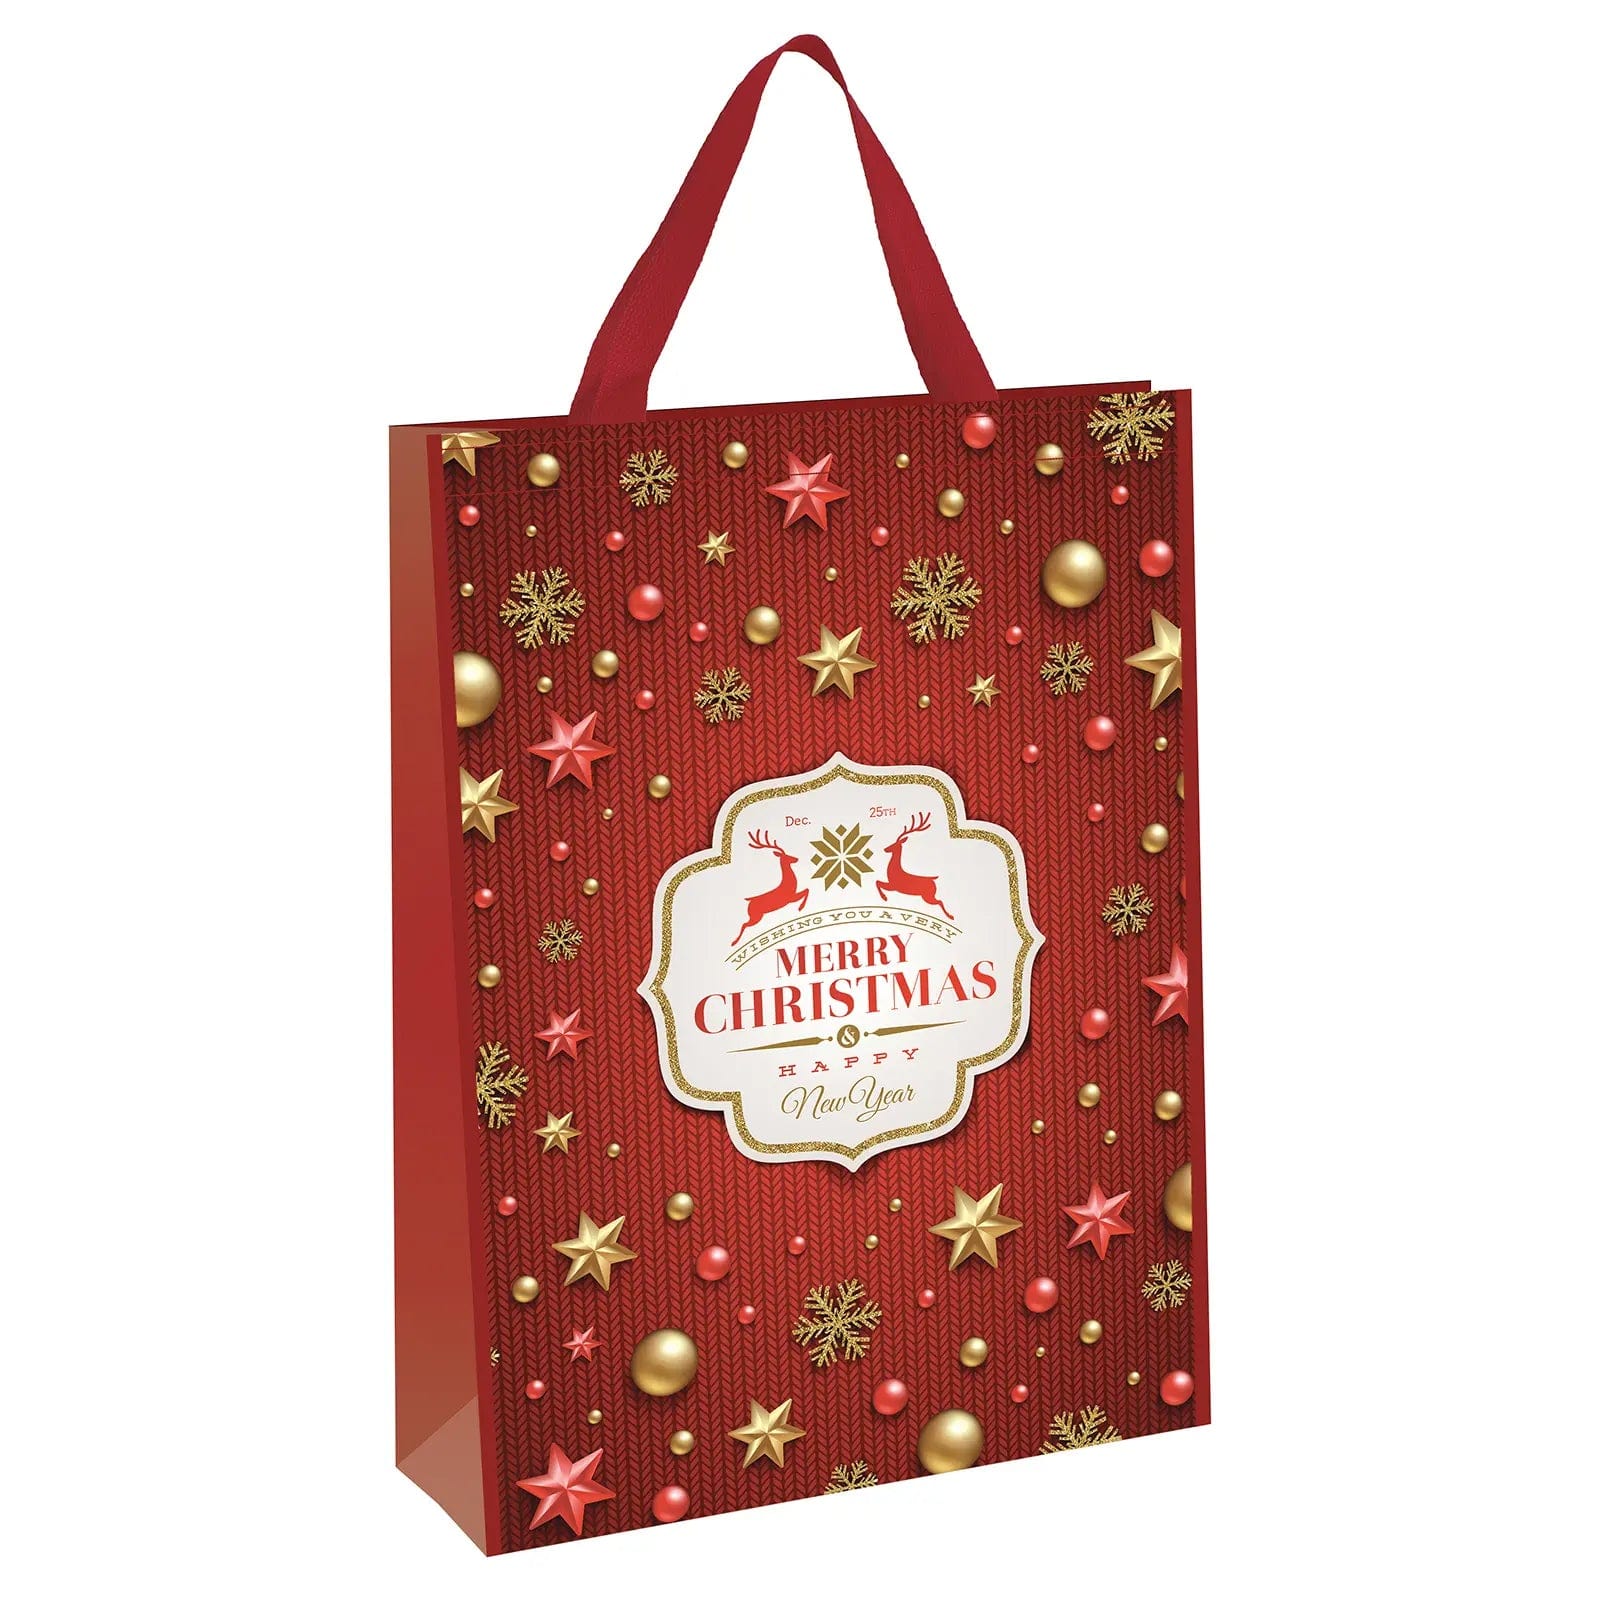 Assorted Large Christmas Gift Bags: Pack of 4 From 0.50 GBP | The Works